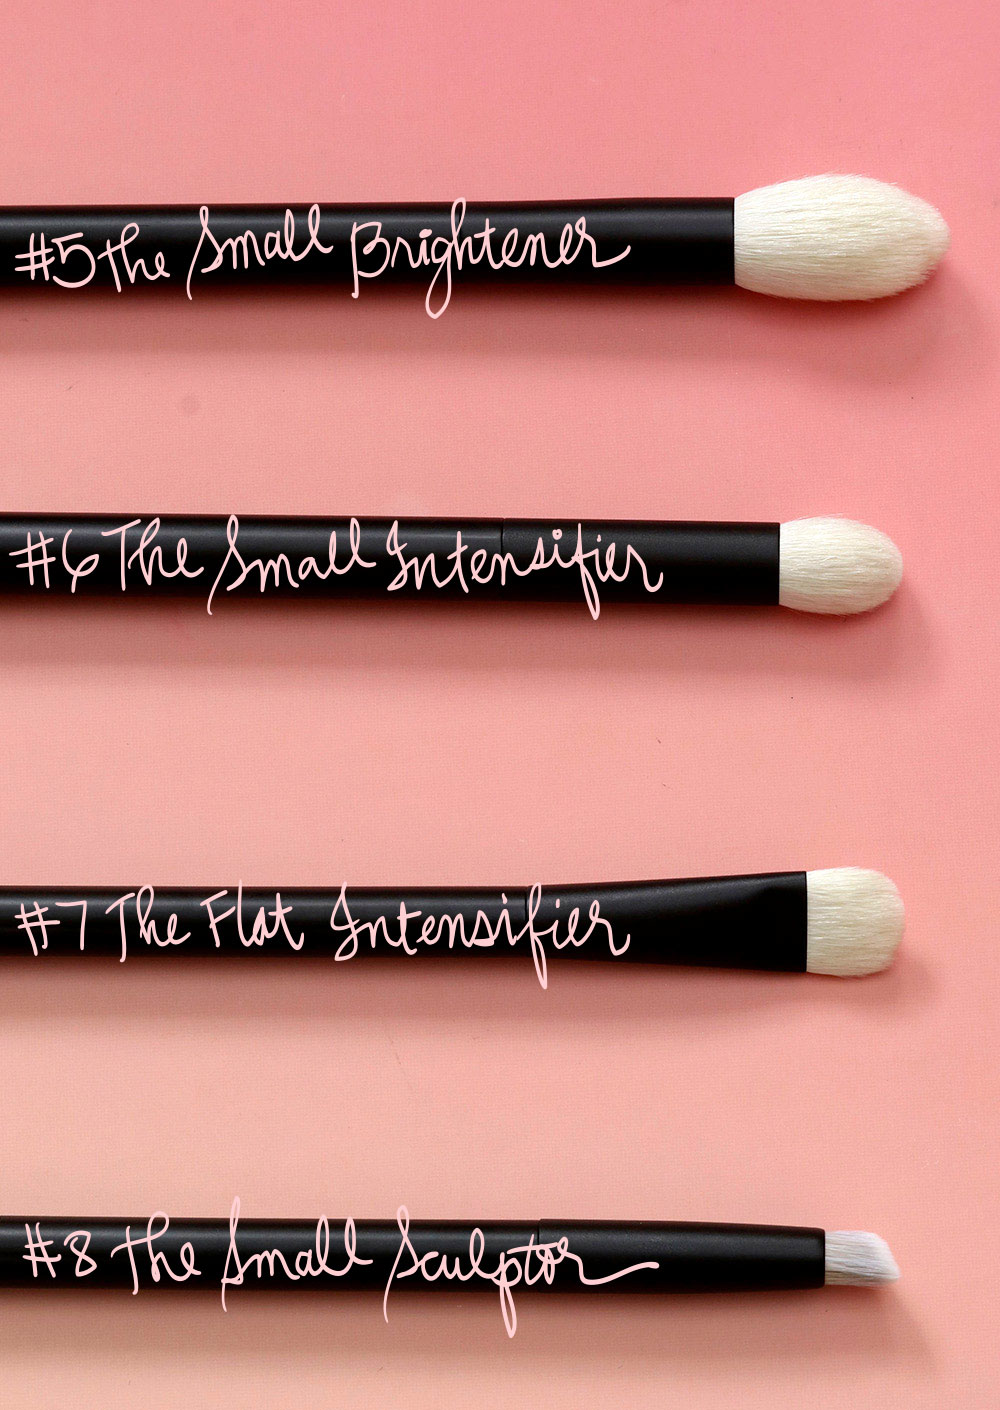 nars pro brush collection 4 8